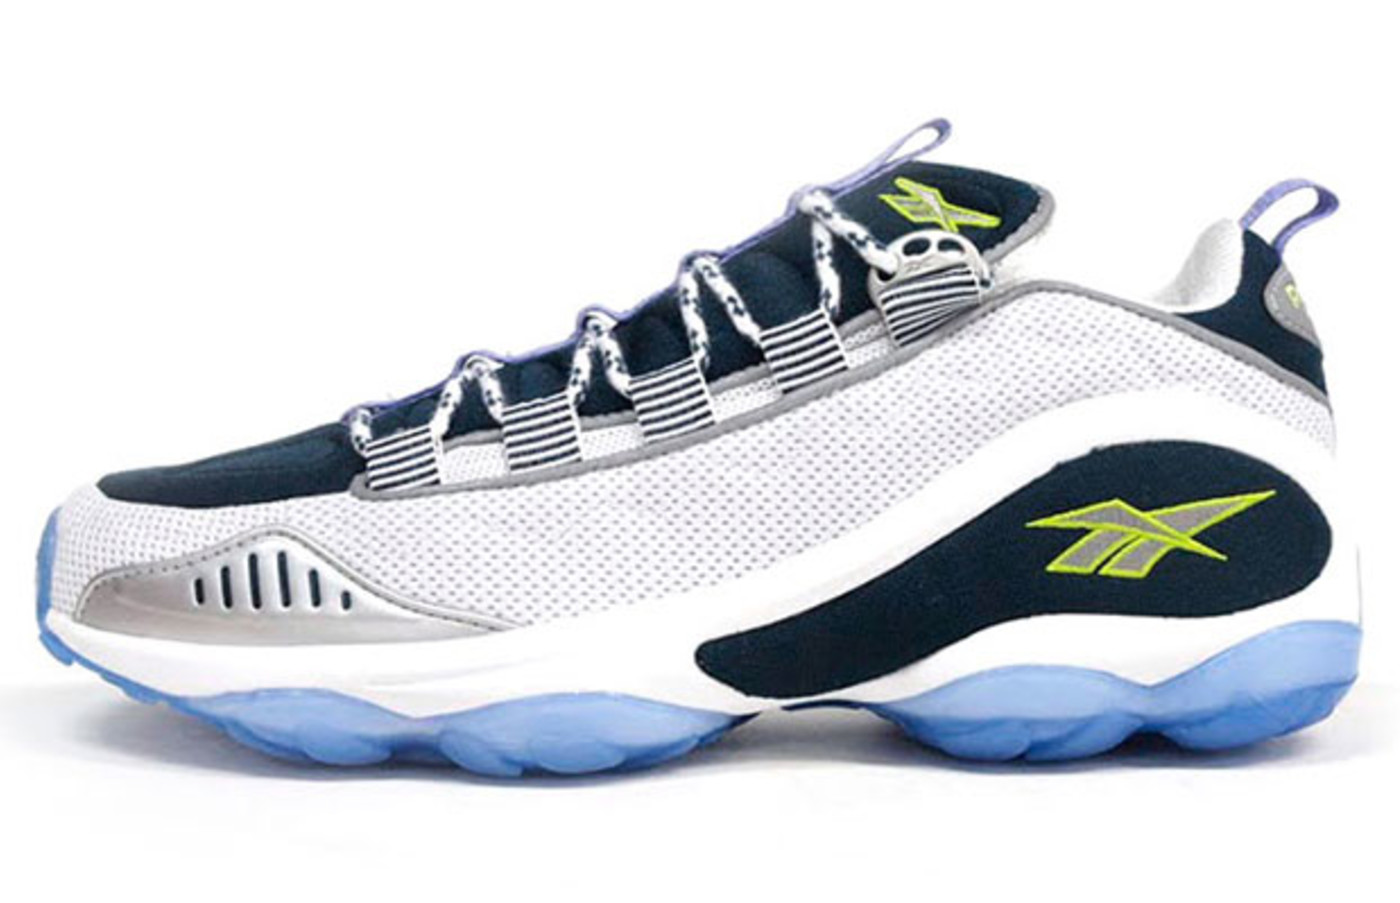 10 Sneakers That Debuted Significant 